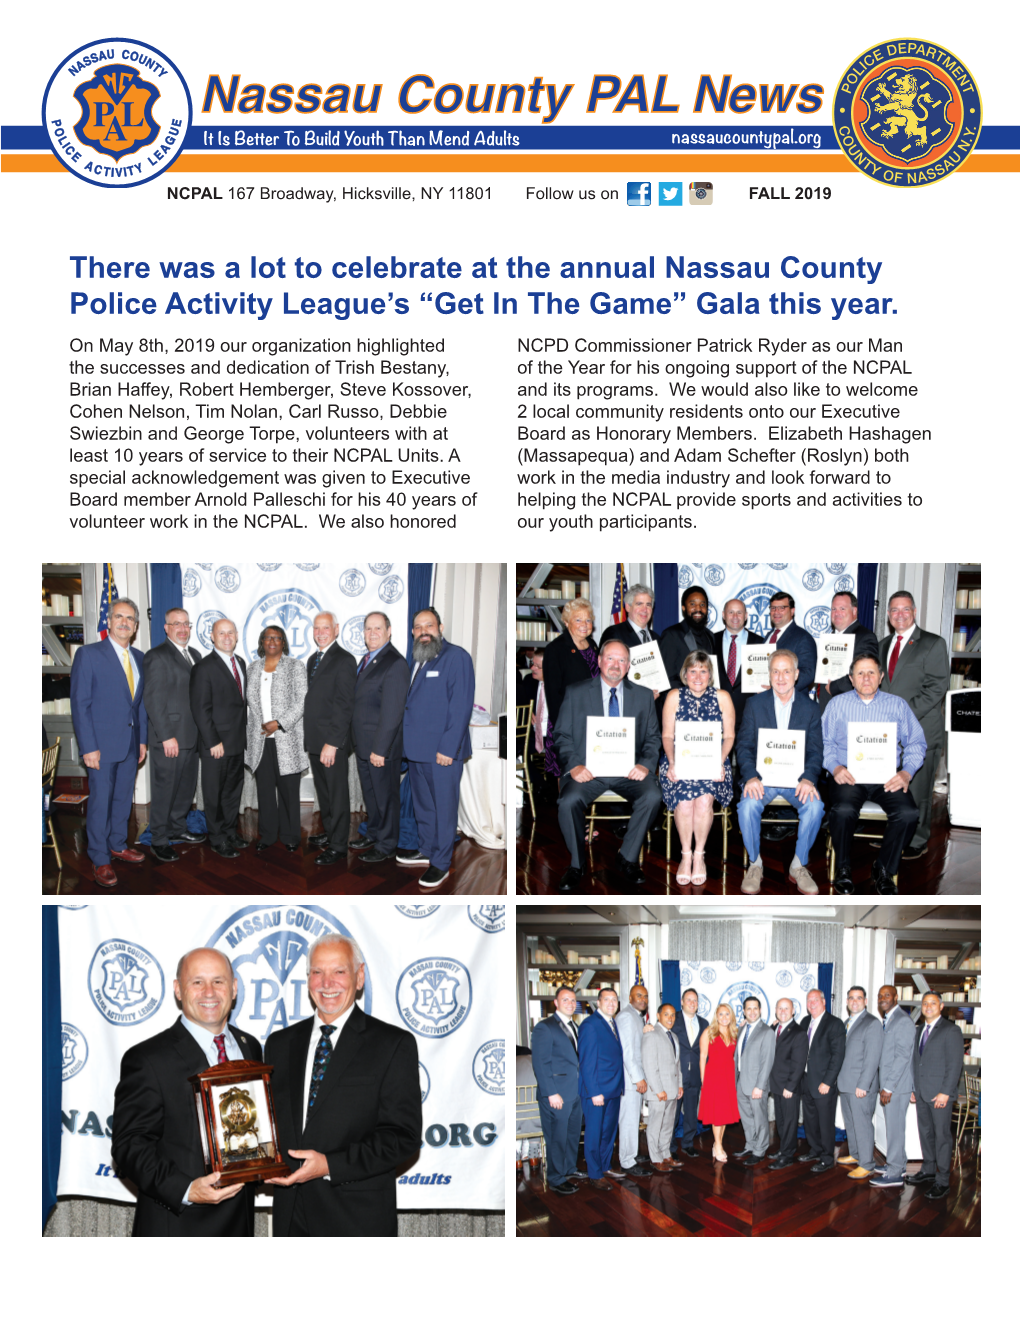 There Was a Lot to Celebrate at the Annual Nassau County Police Activity League’S “Get in the Game” Gala This Year